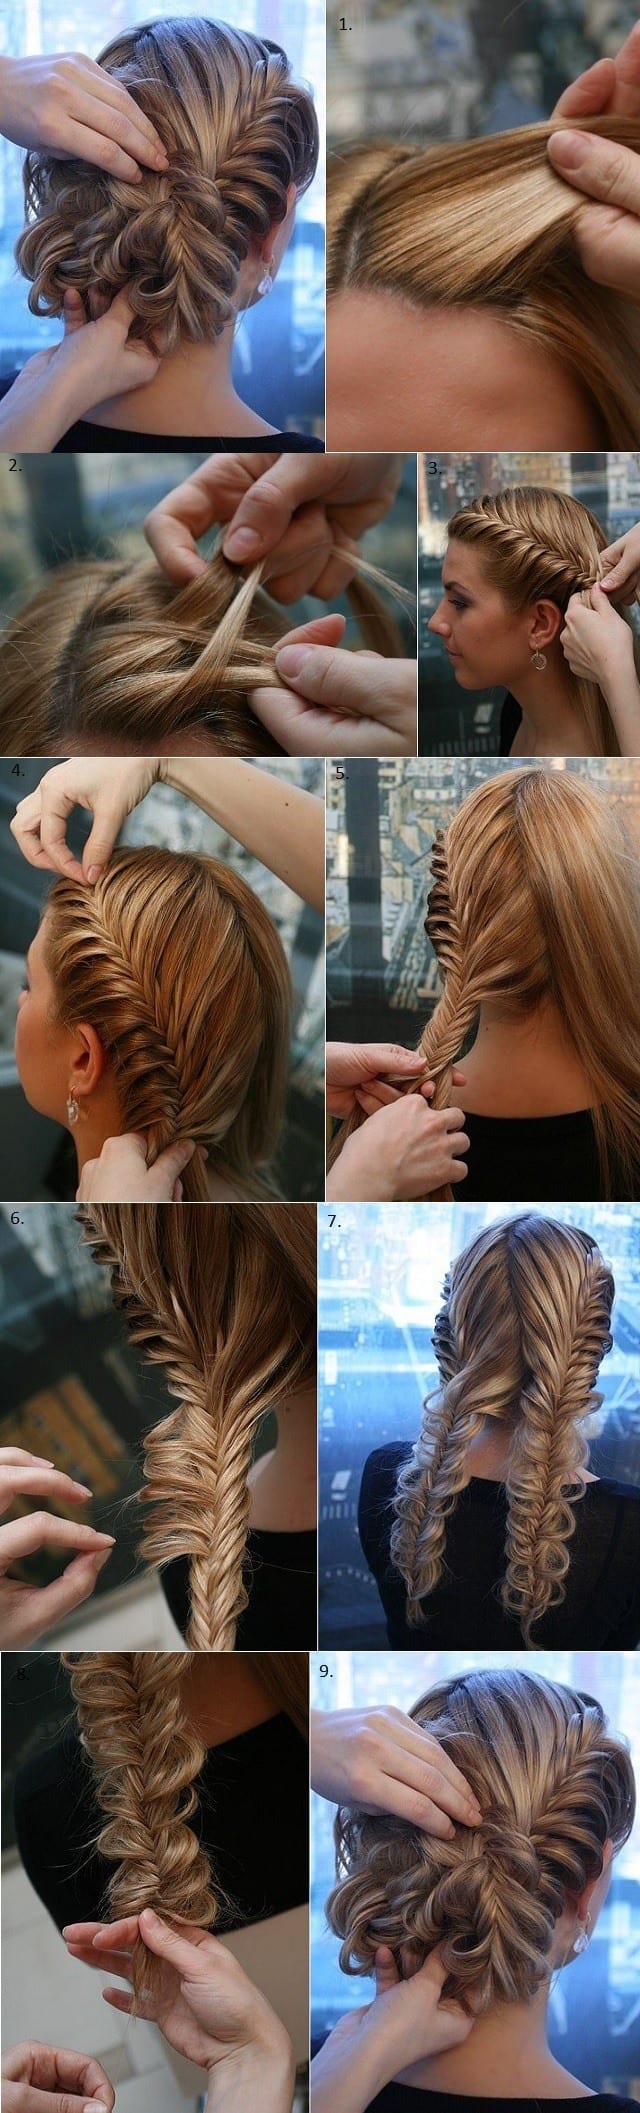 How to Make Braided hairstyle